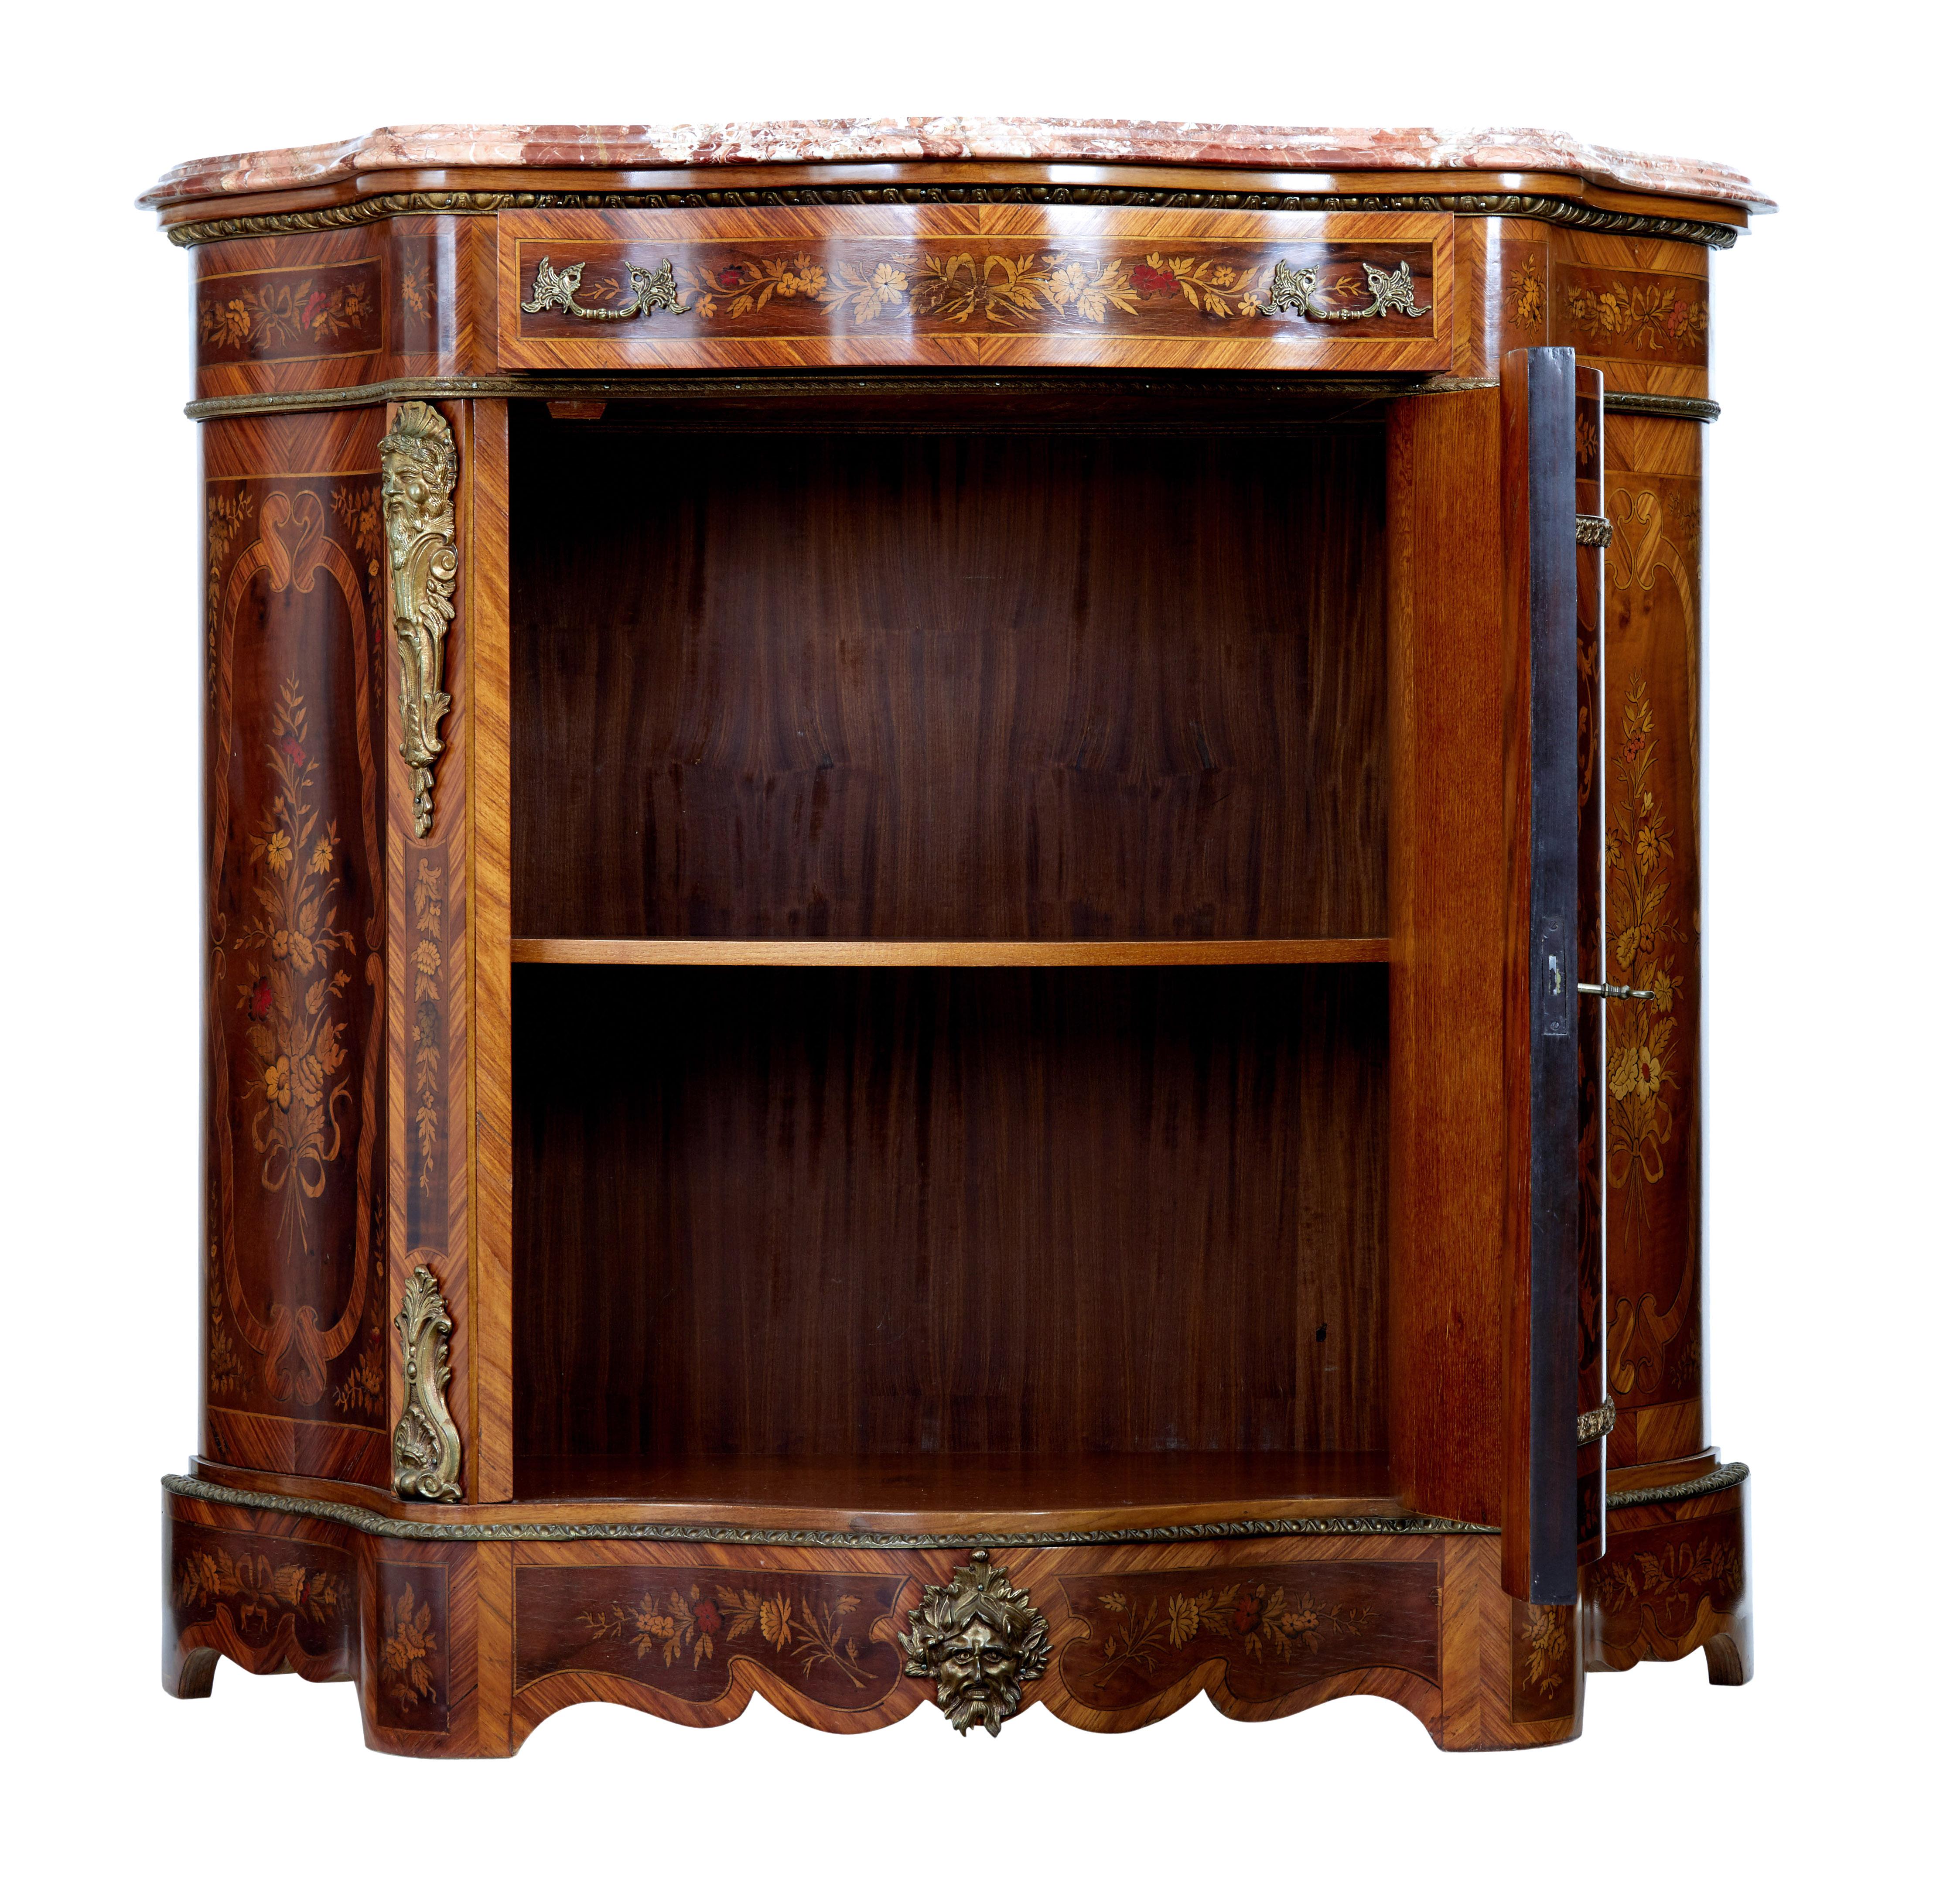 Fine quality marble top sideboard circa 1900.

Serpentine shaped and profusely decorated with marquetry and inlay.

Original marble top which is loose fitted to the top. Single drawer below the top surface, below which is a single door cupboard